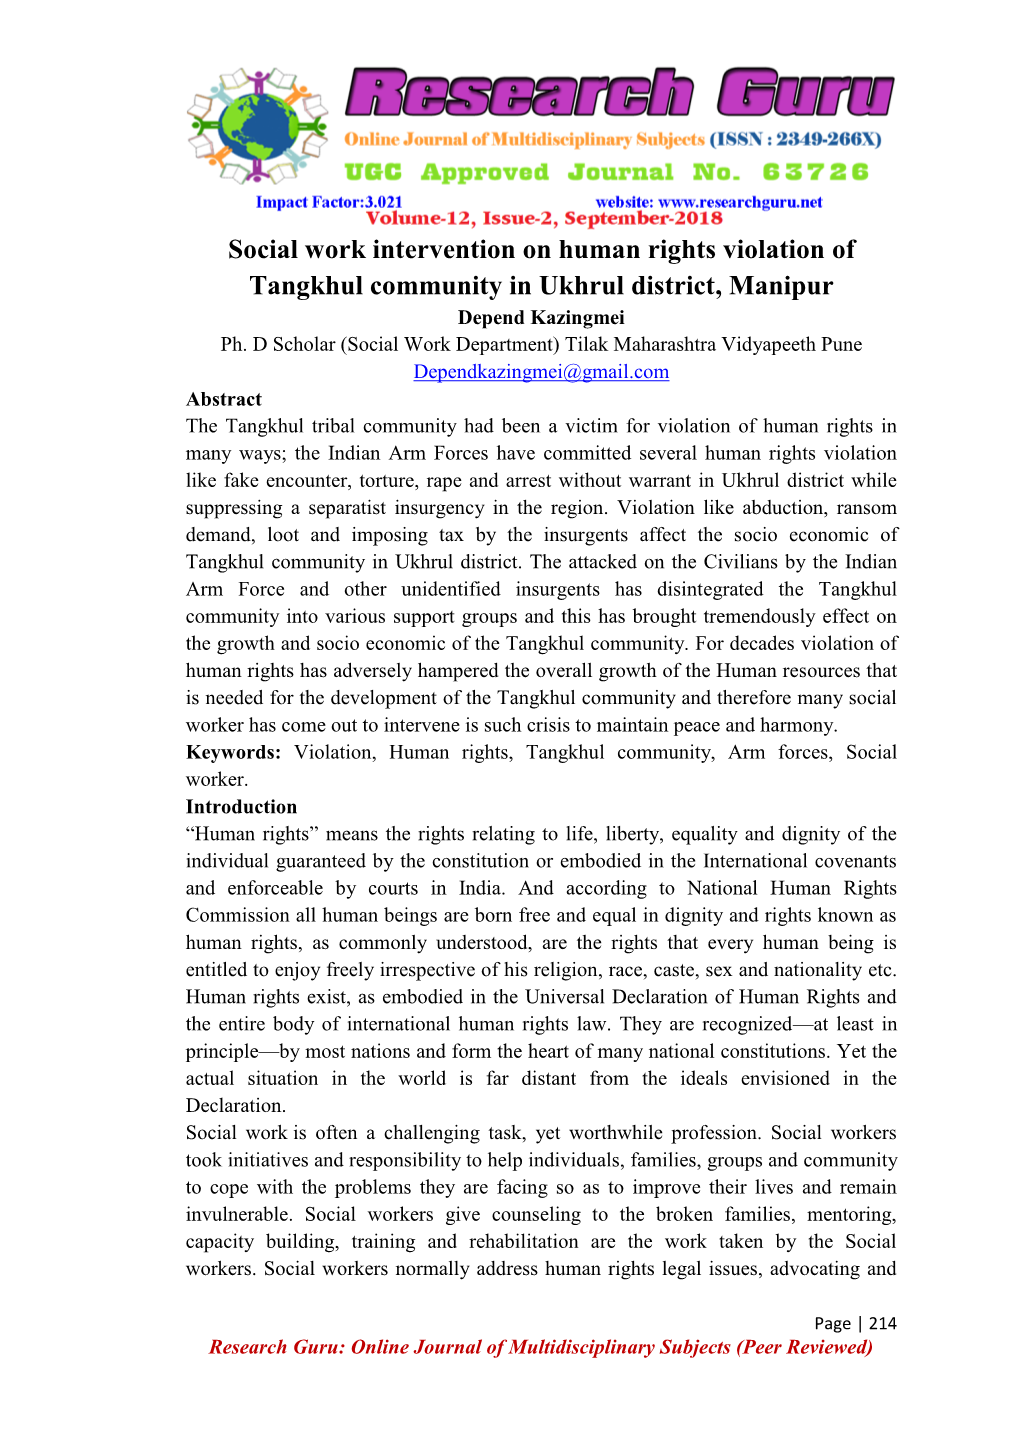 Social Work Intervention on Human Rights Violation of Tangkhul Community in Ukhrul District, Manipur Depend Kazingmei Ph